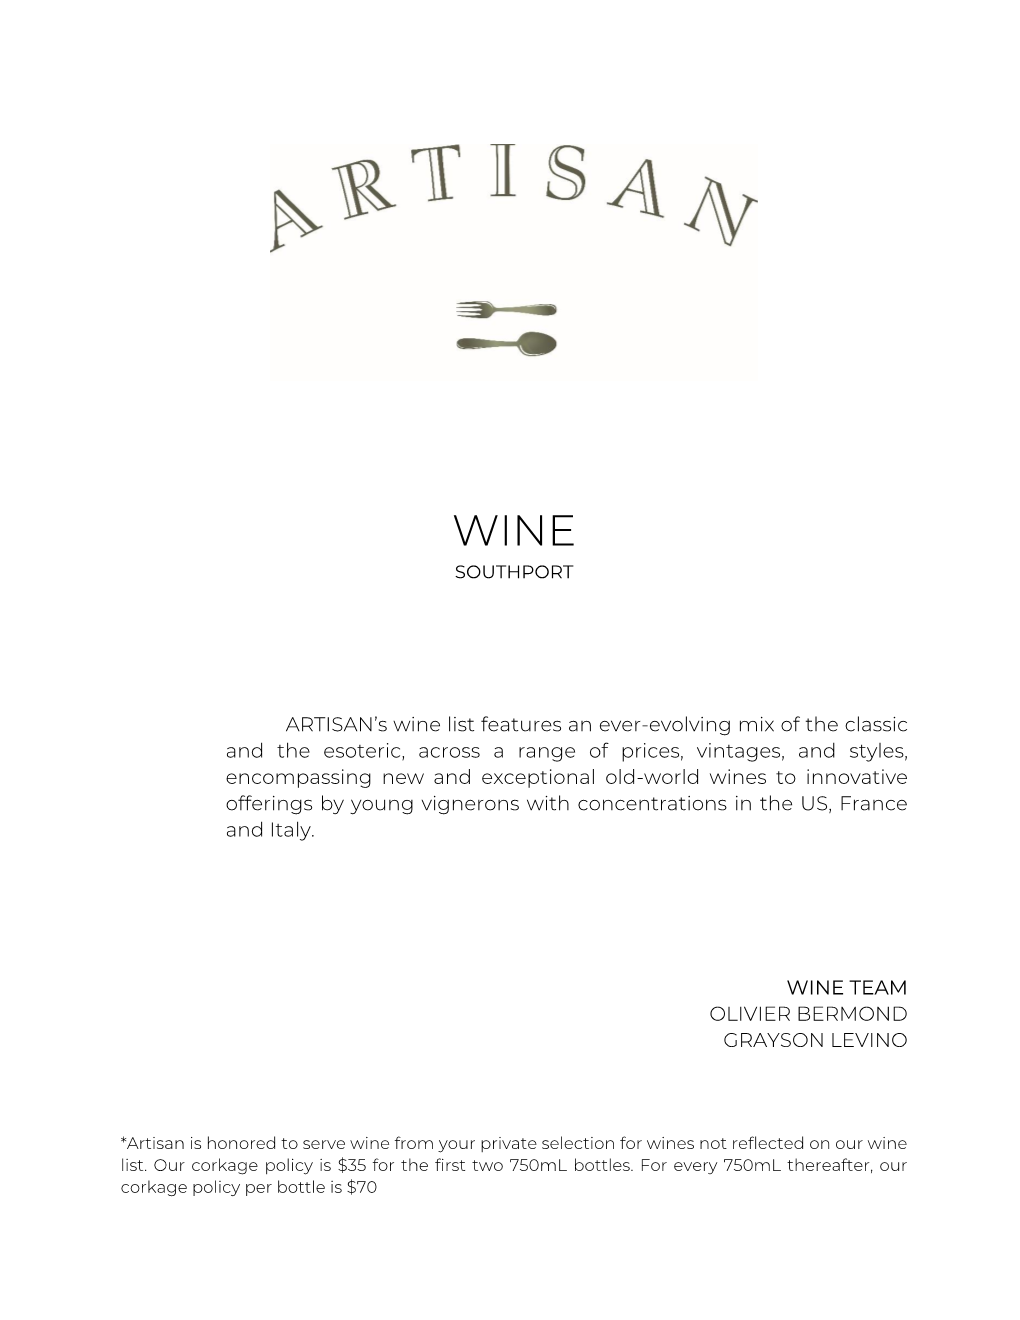 ARTISAN's Wine List Features an Ever-Evolving Mix of the Classic and the Esoteric, Across a Range of Prices, Vintages, And